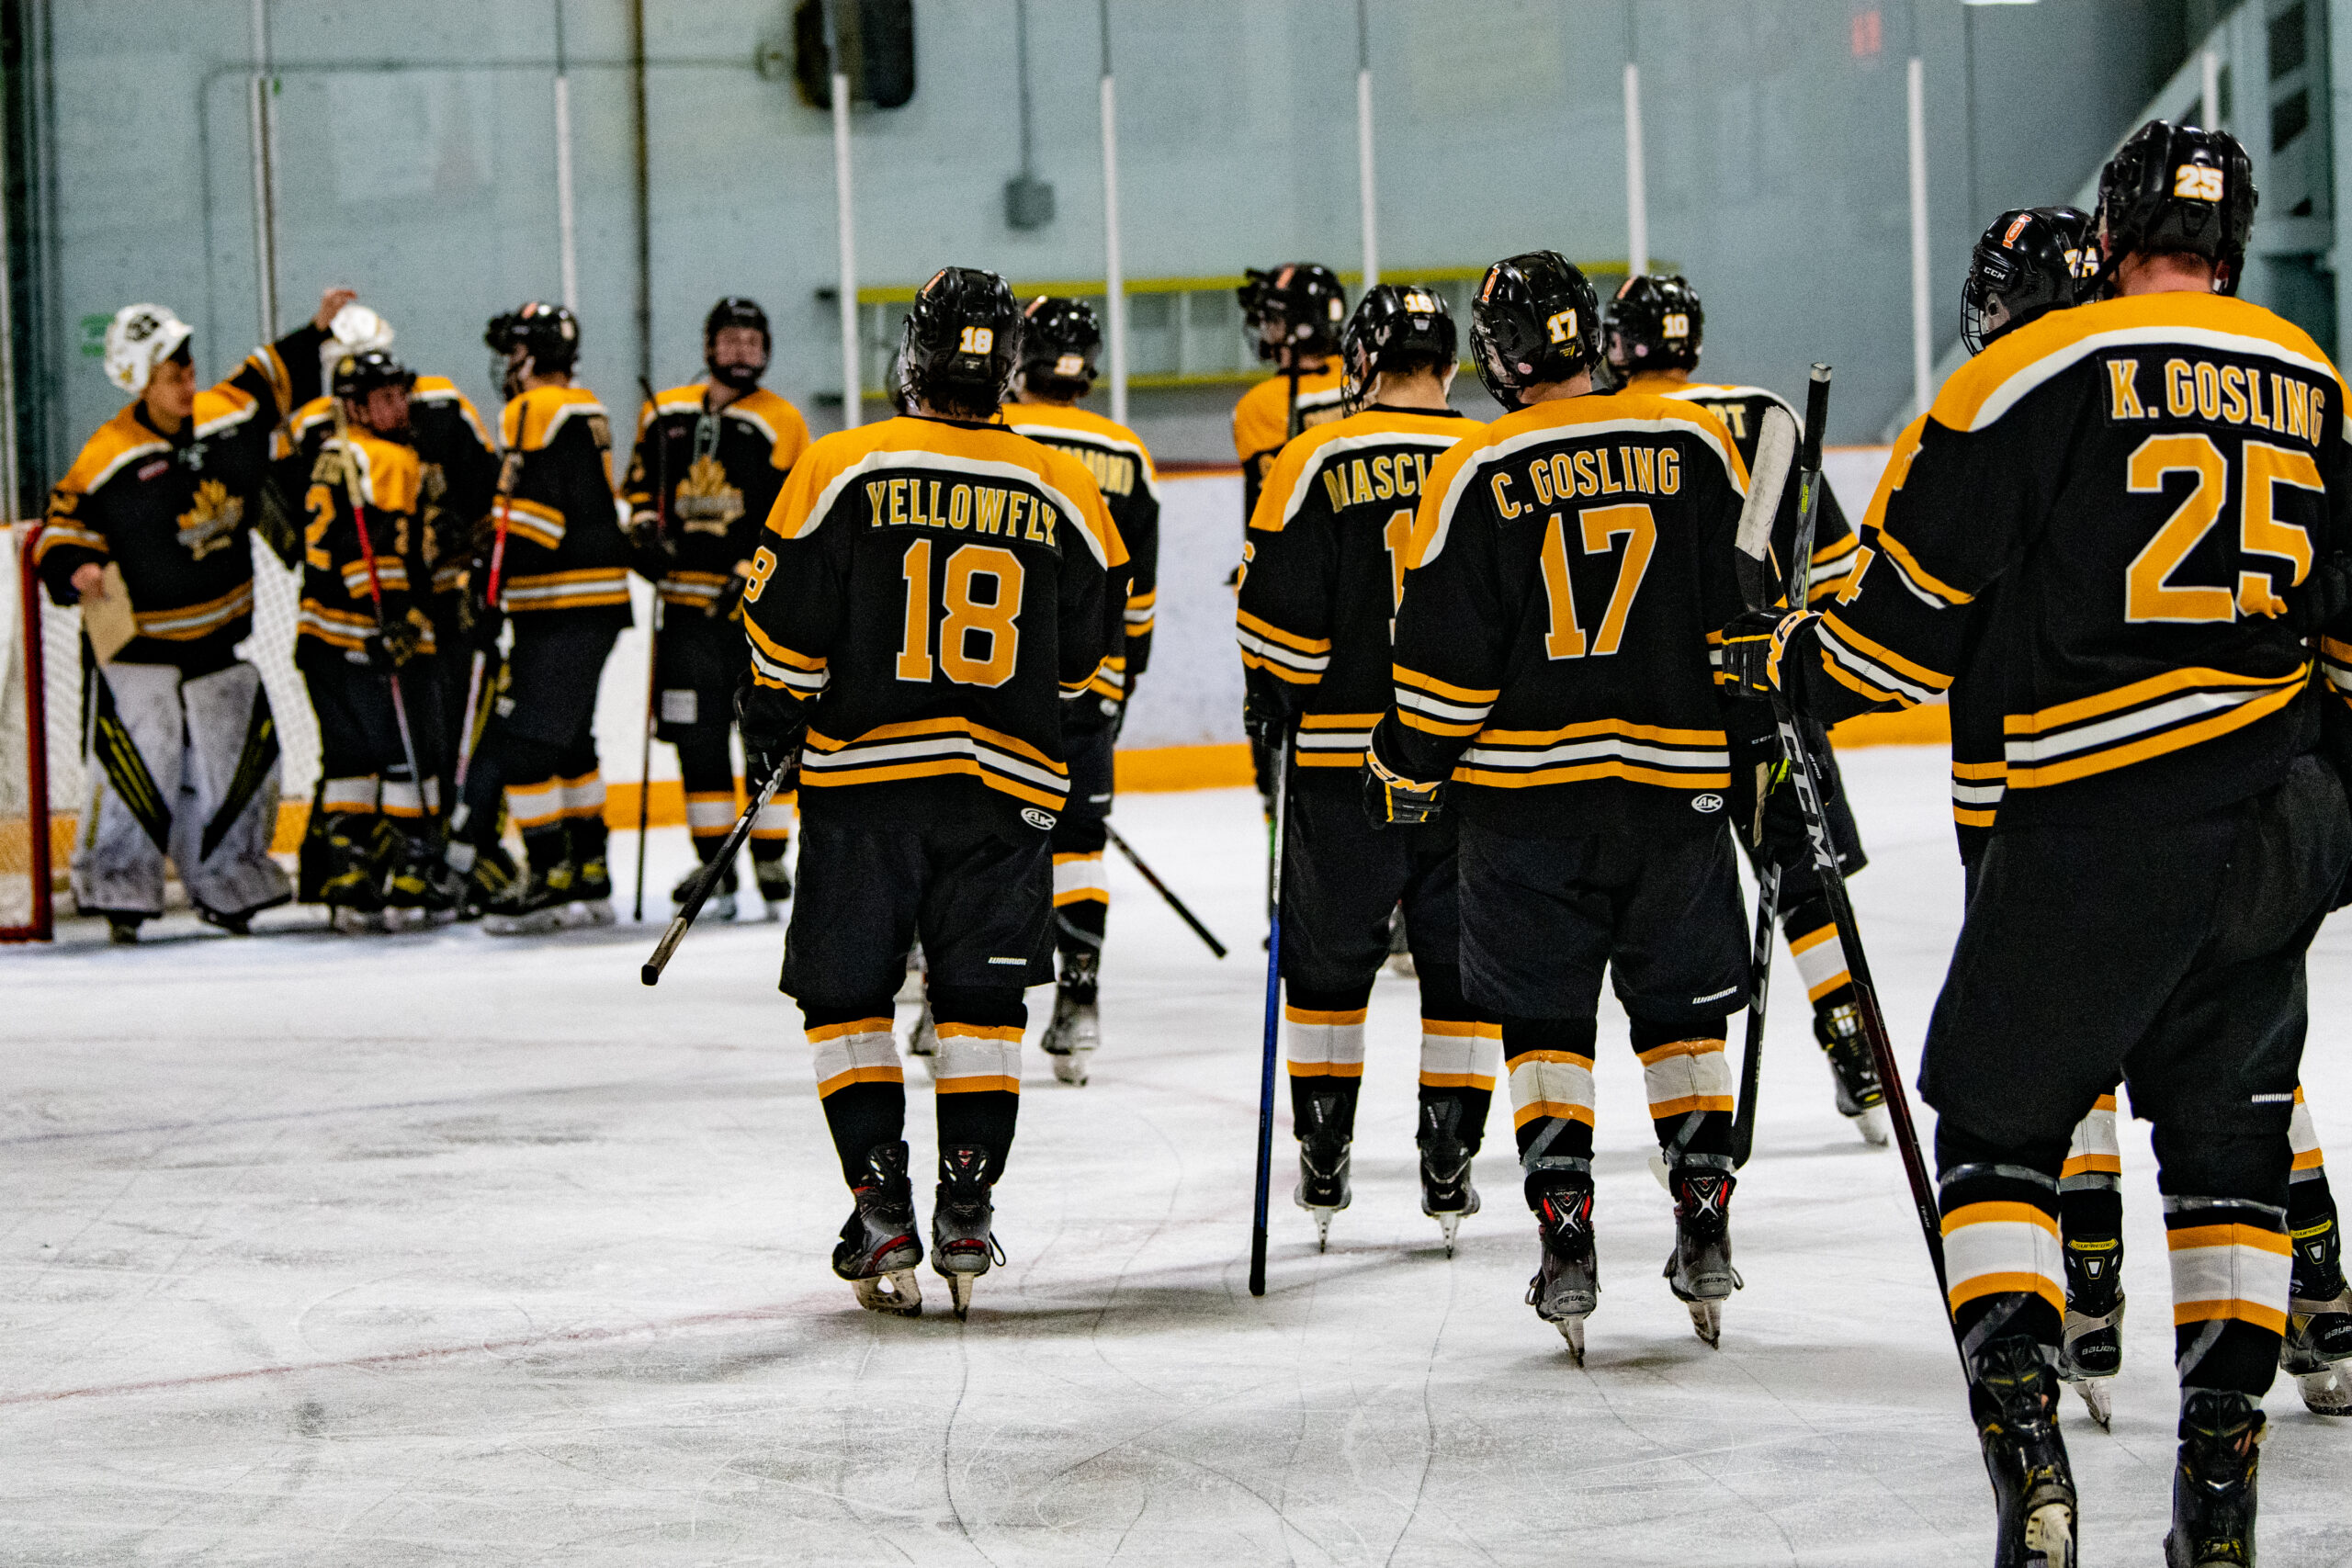 Wheatland Kings eliminated from spring playoffs